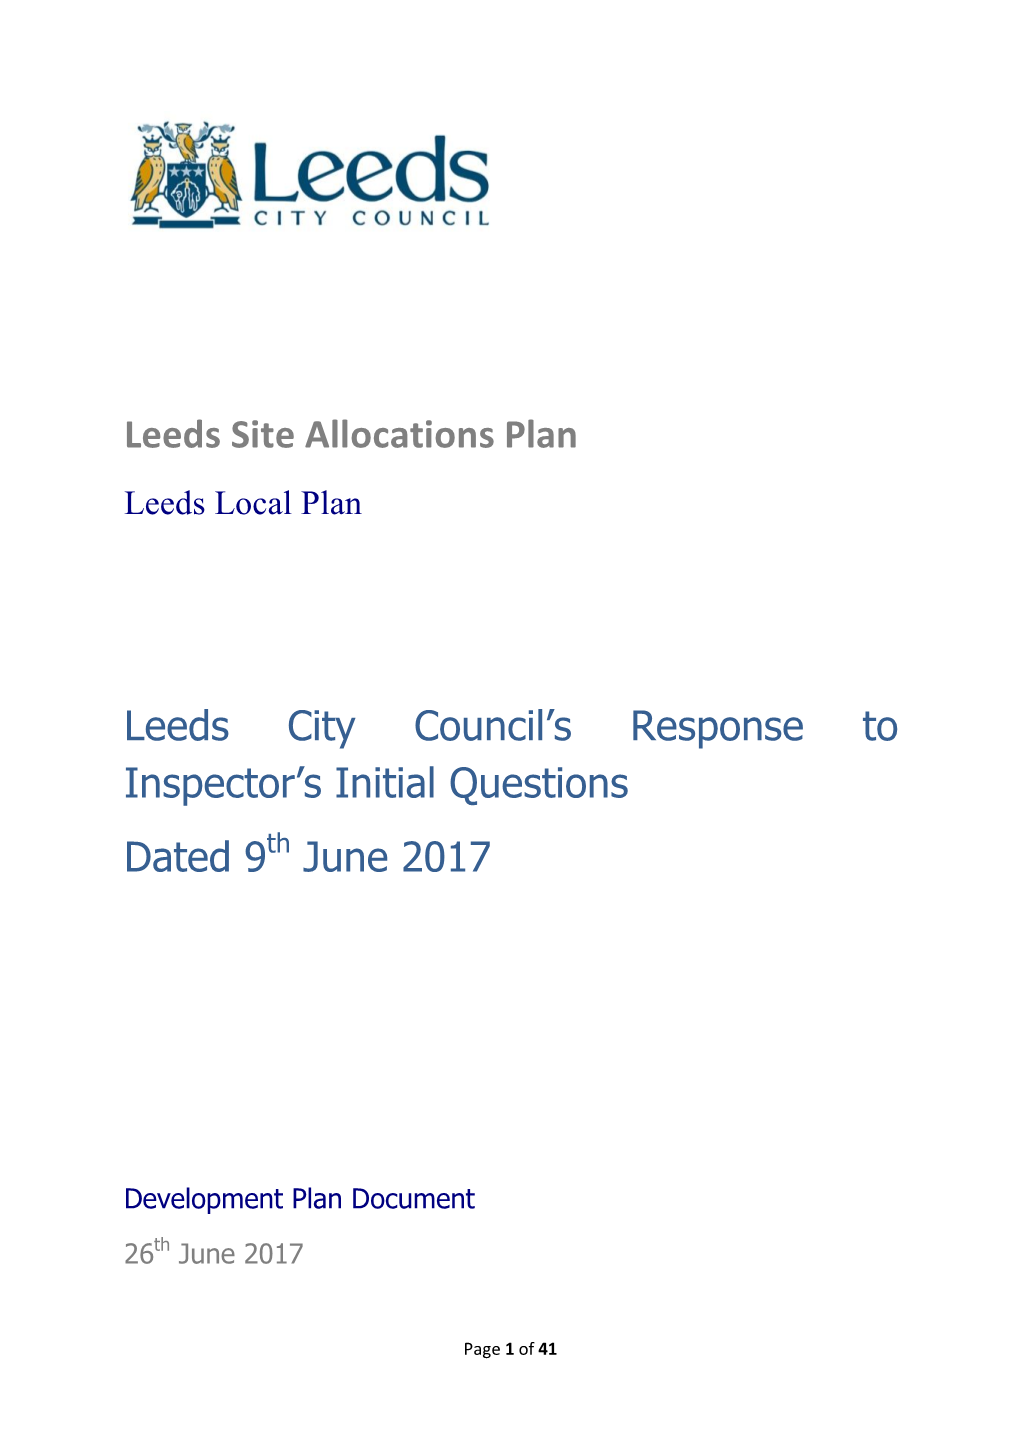 Leeds City Council's Response to Inspector's Initial Questions Dated 9